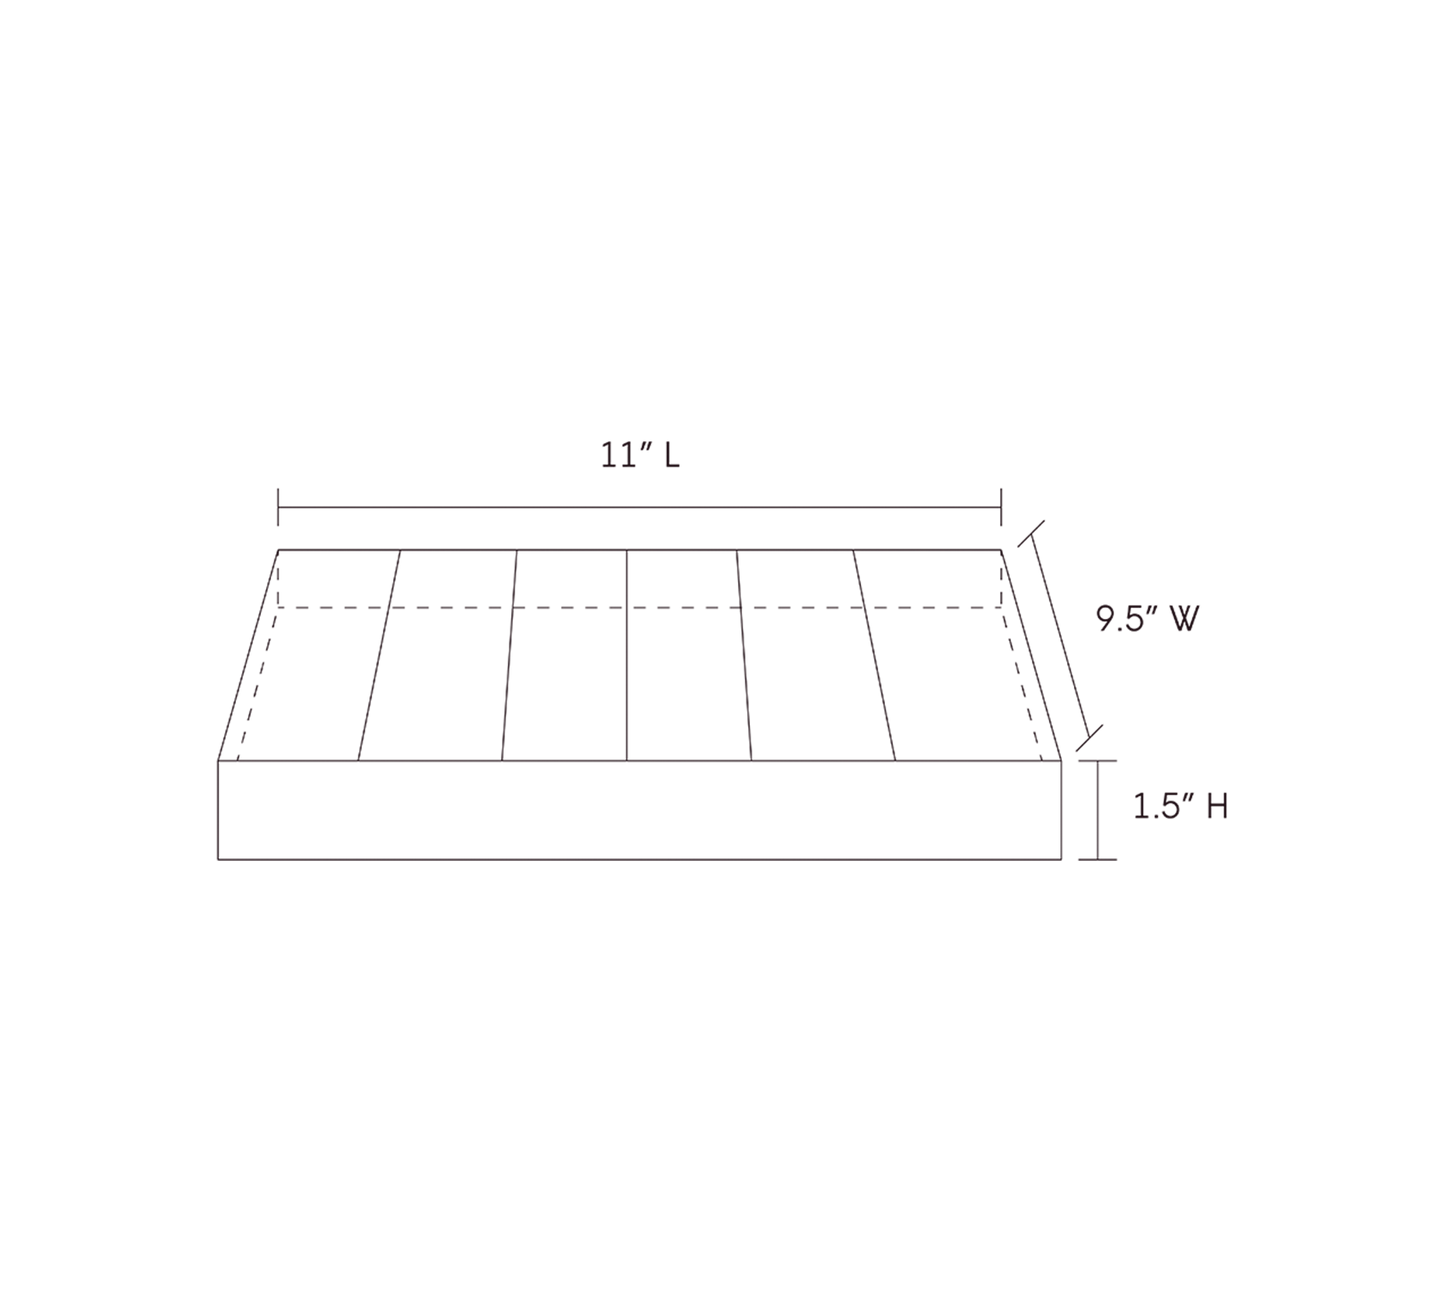 Line drawing of the 6V tray with dimensions of 11 inches in length, 9.5 inches in width, and 1.5 inches in height